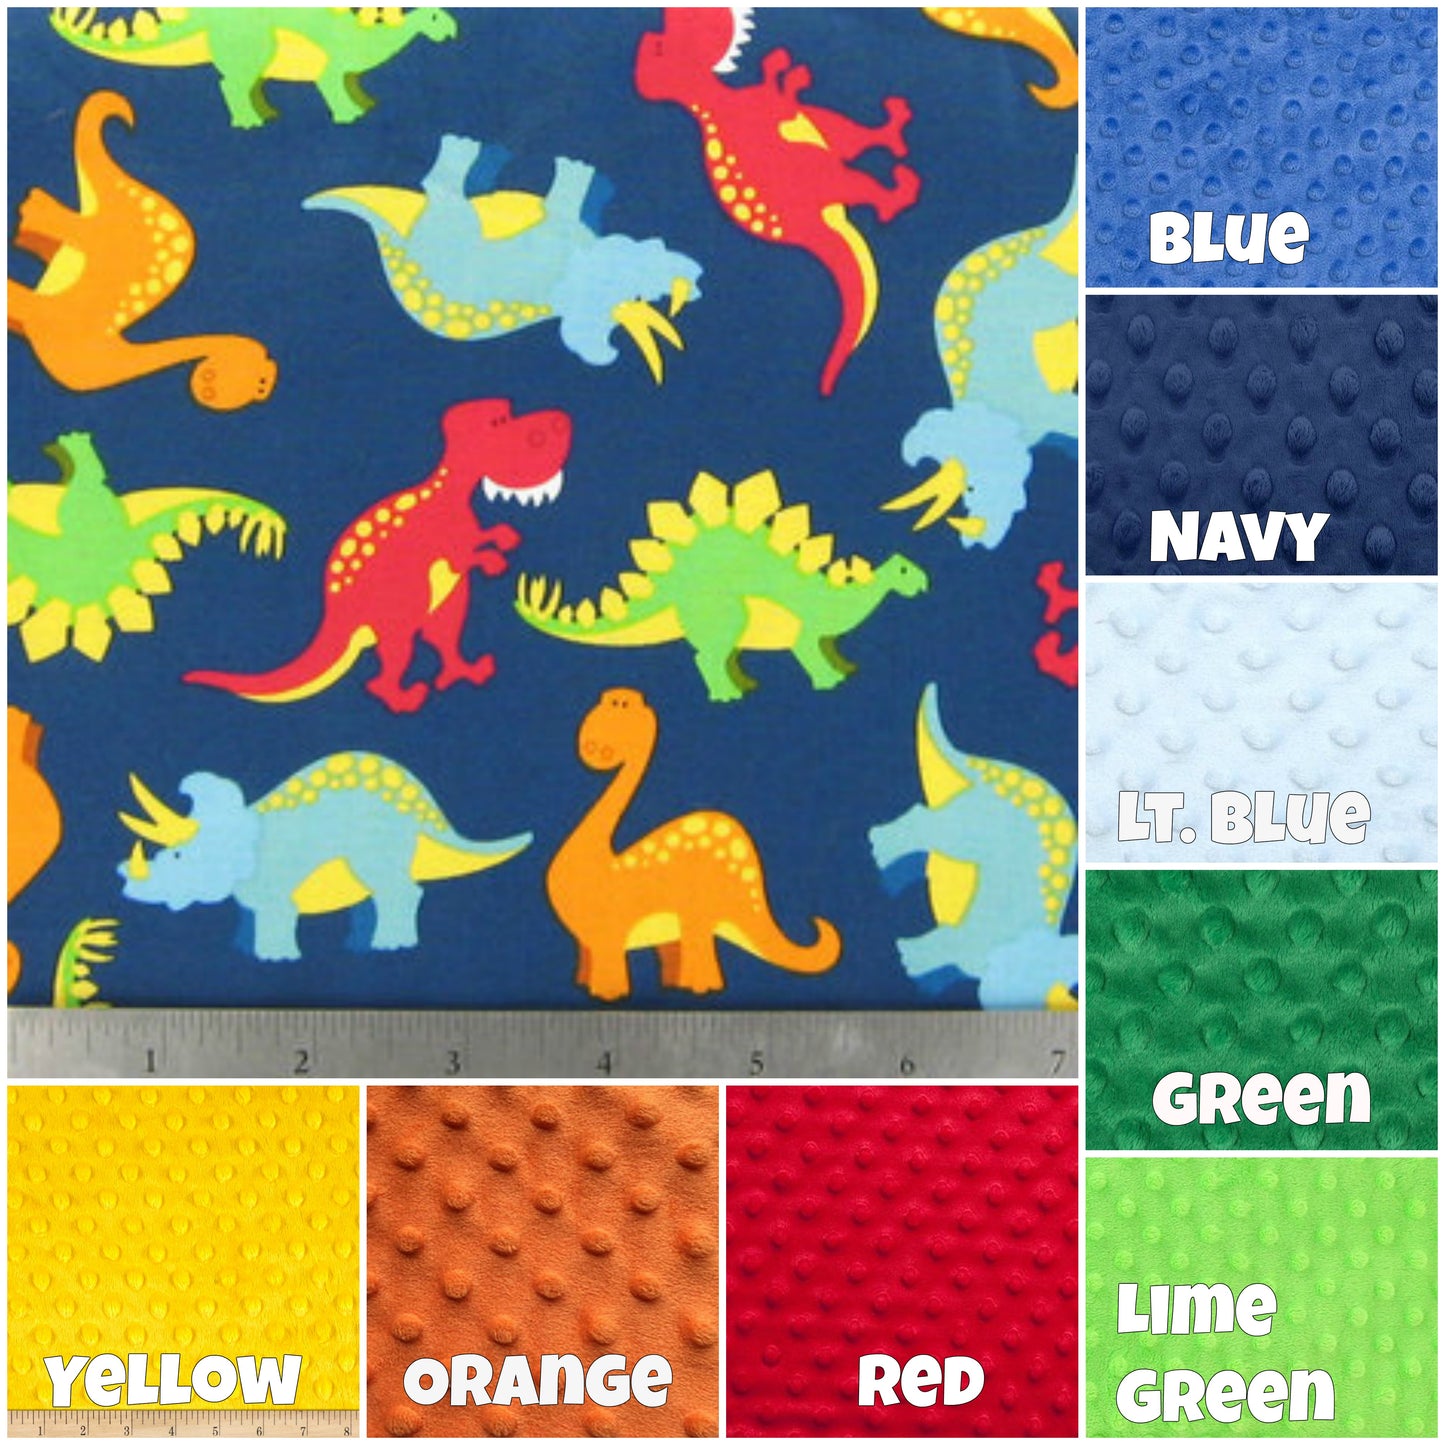 minky colors available: blue, navy, light blue, green, lime green, red, orange, yellow